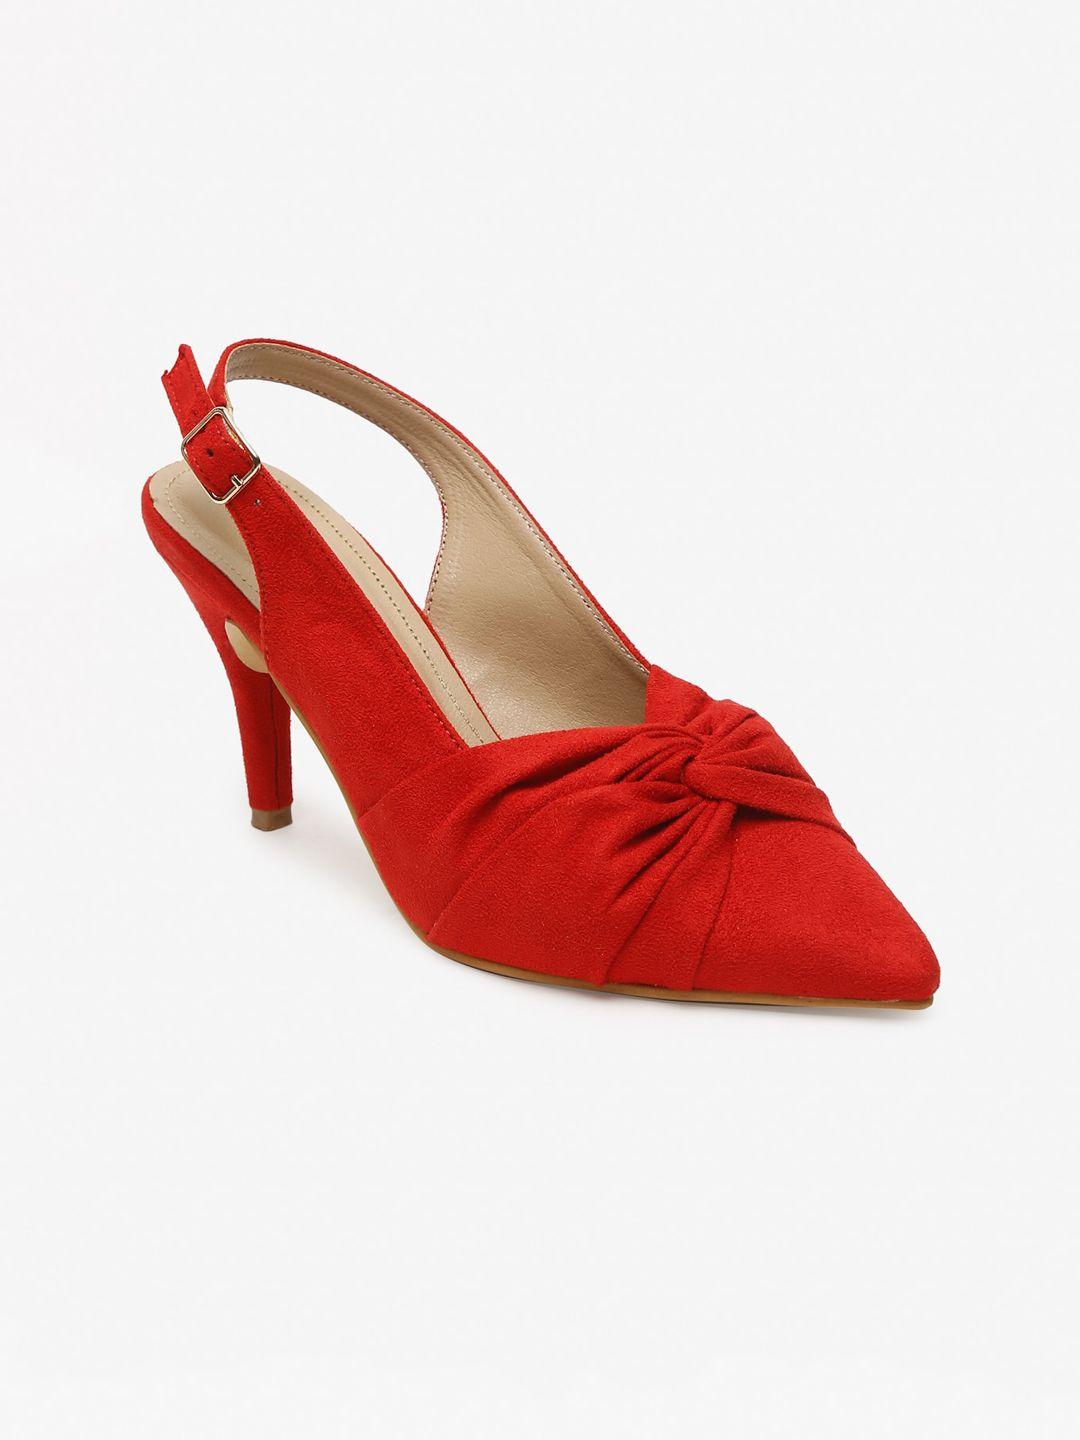 flat-n-heels-red-suede-pumps-with-bows